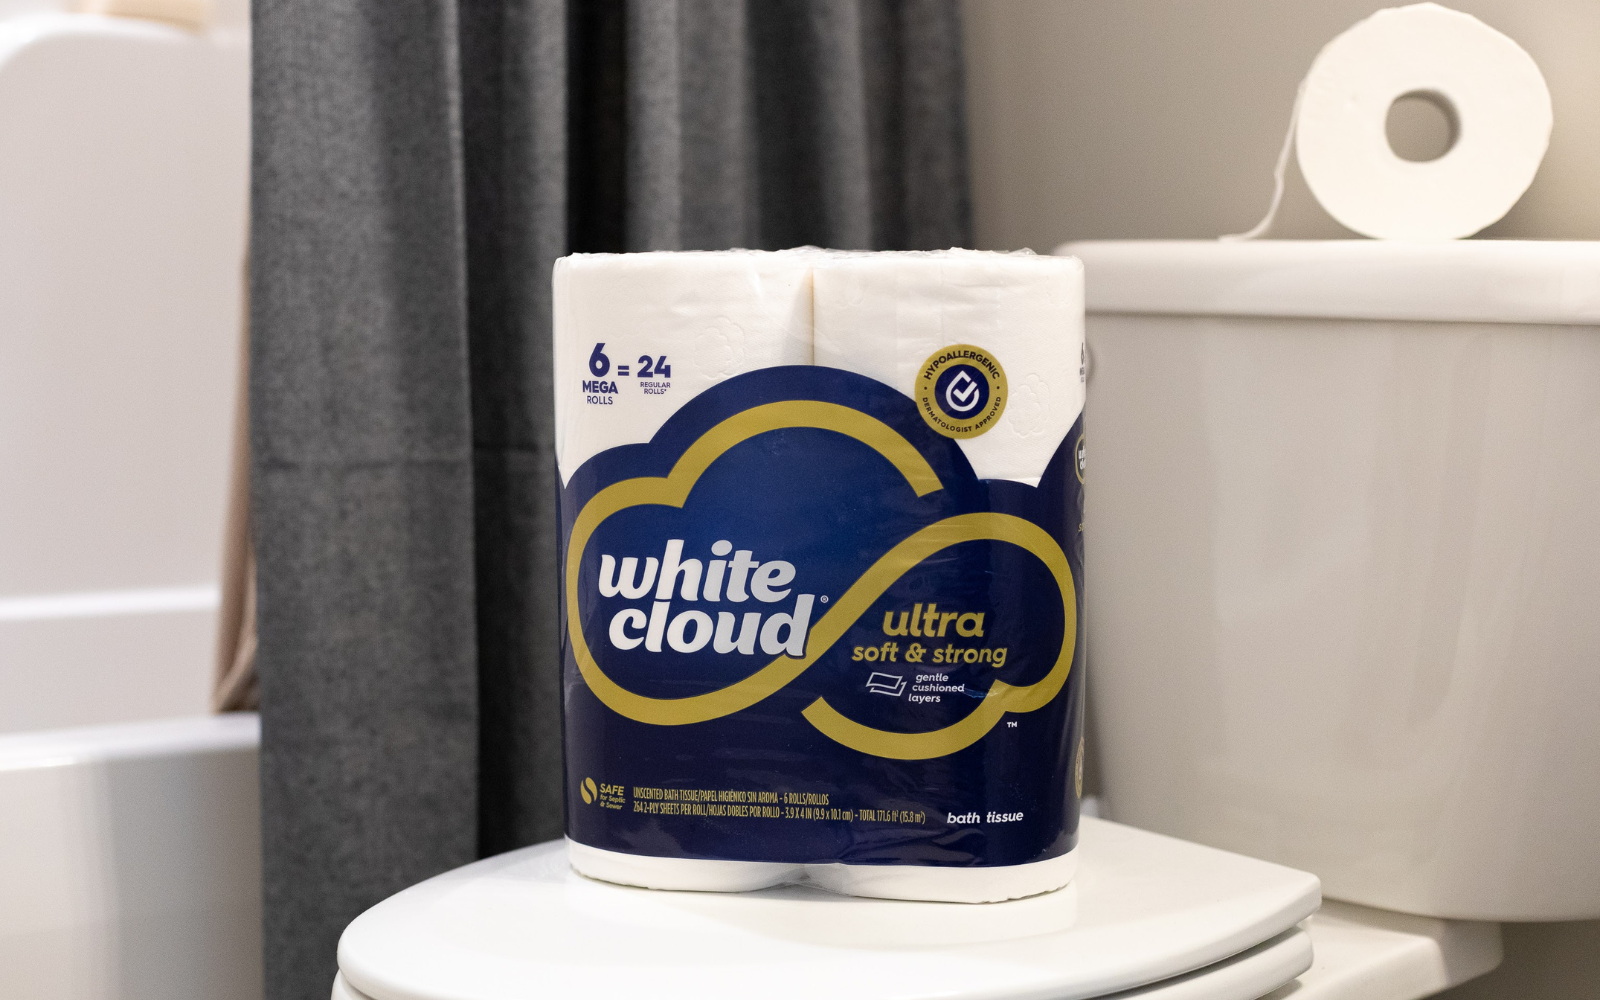 Time To Restock For More Holiday Fun –  White Cloud® Toilet Paper & Paper Towels Are BOGO At Publix